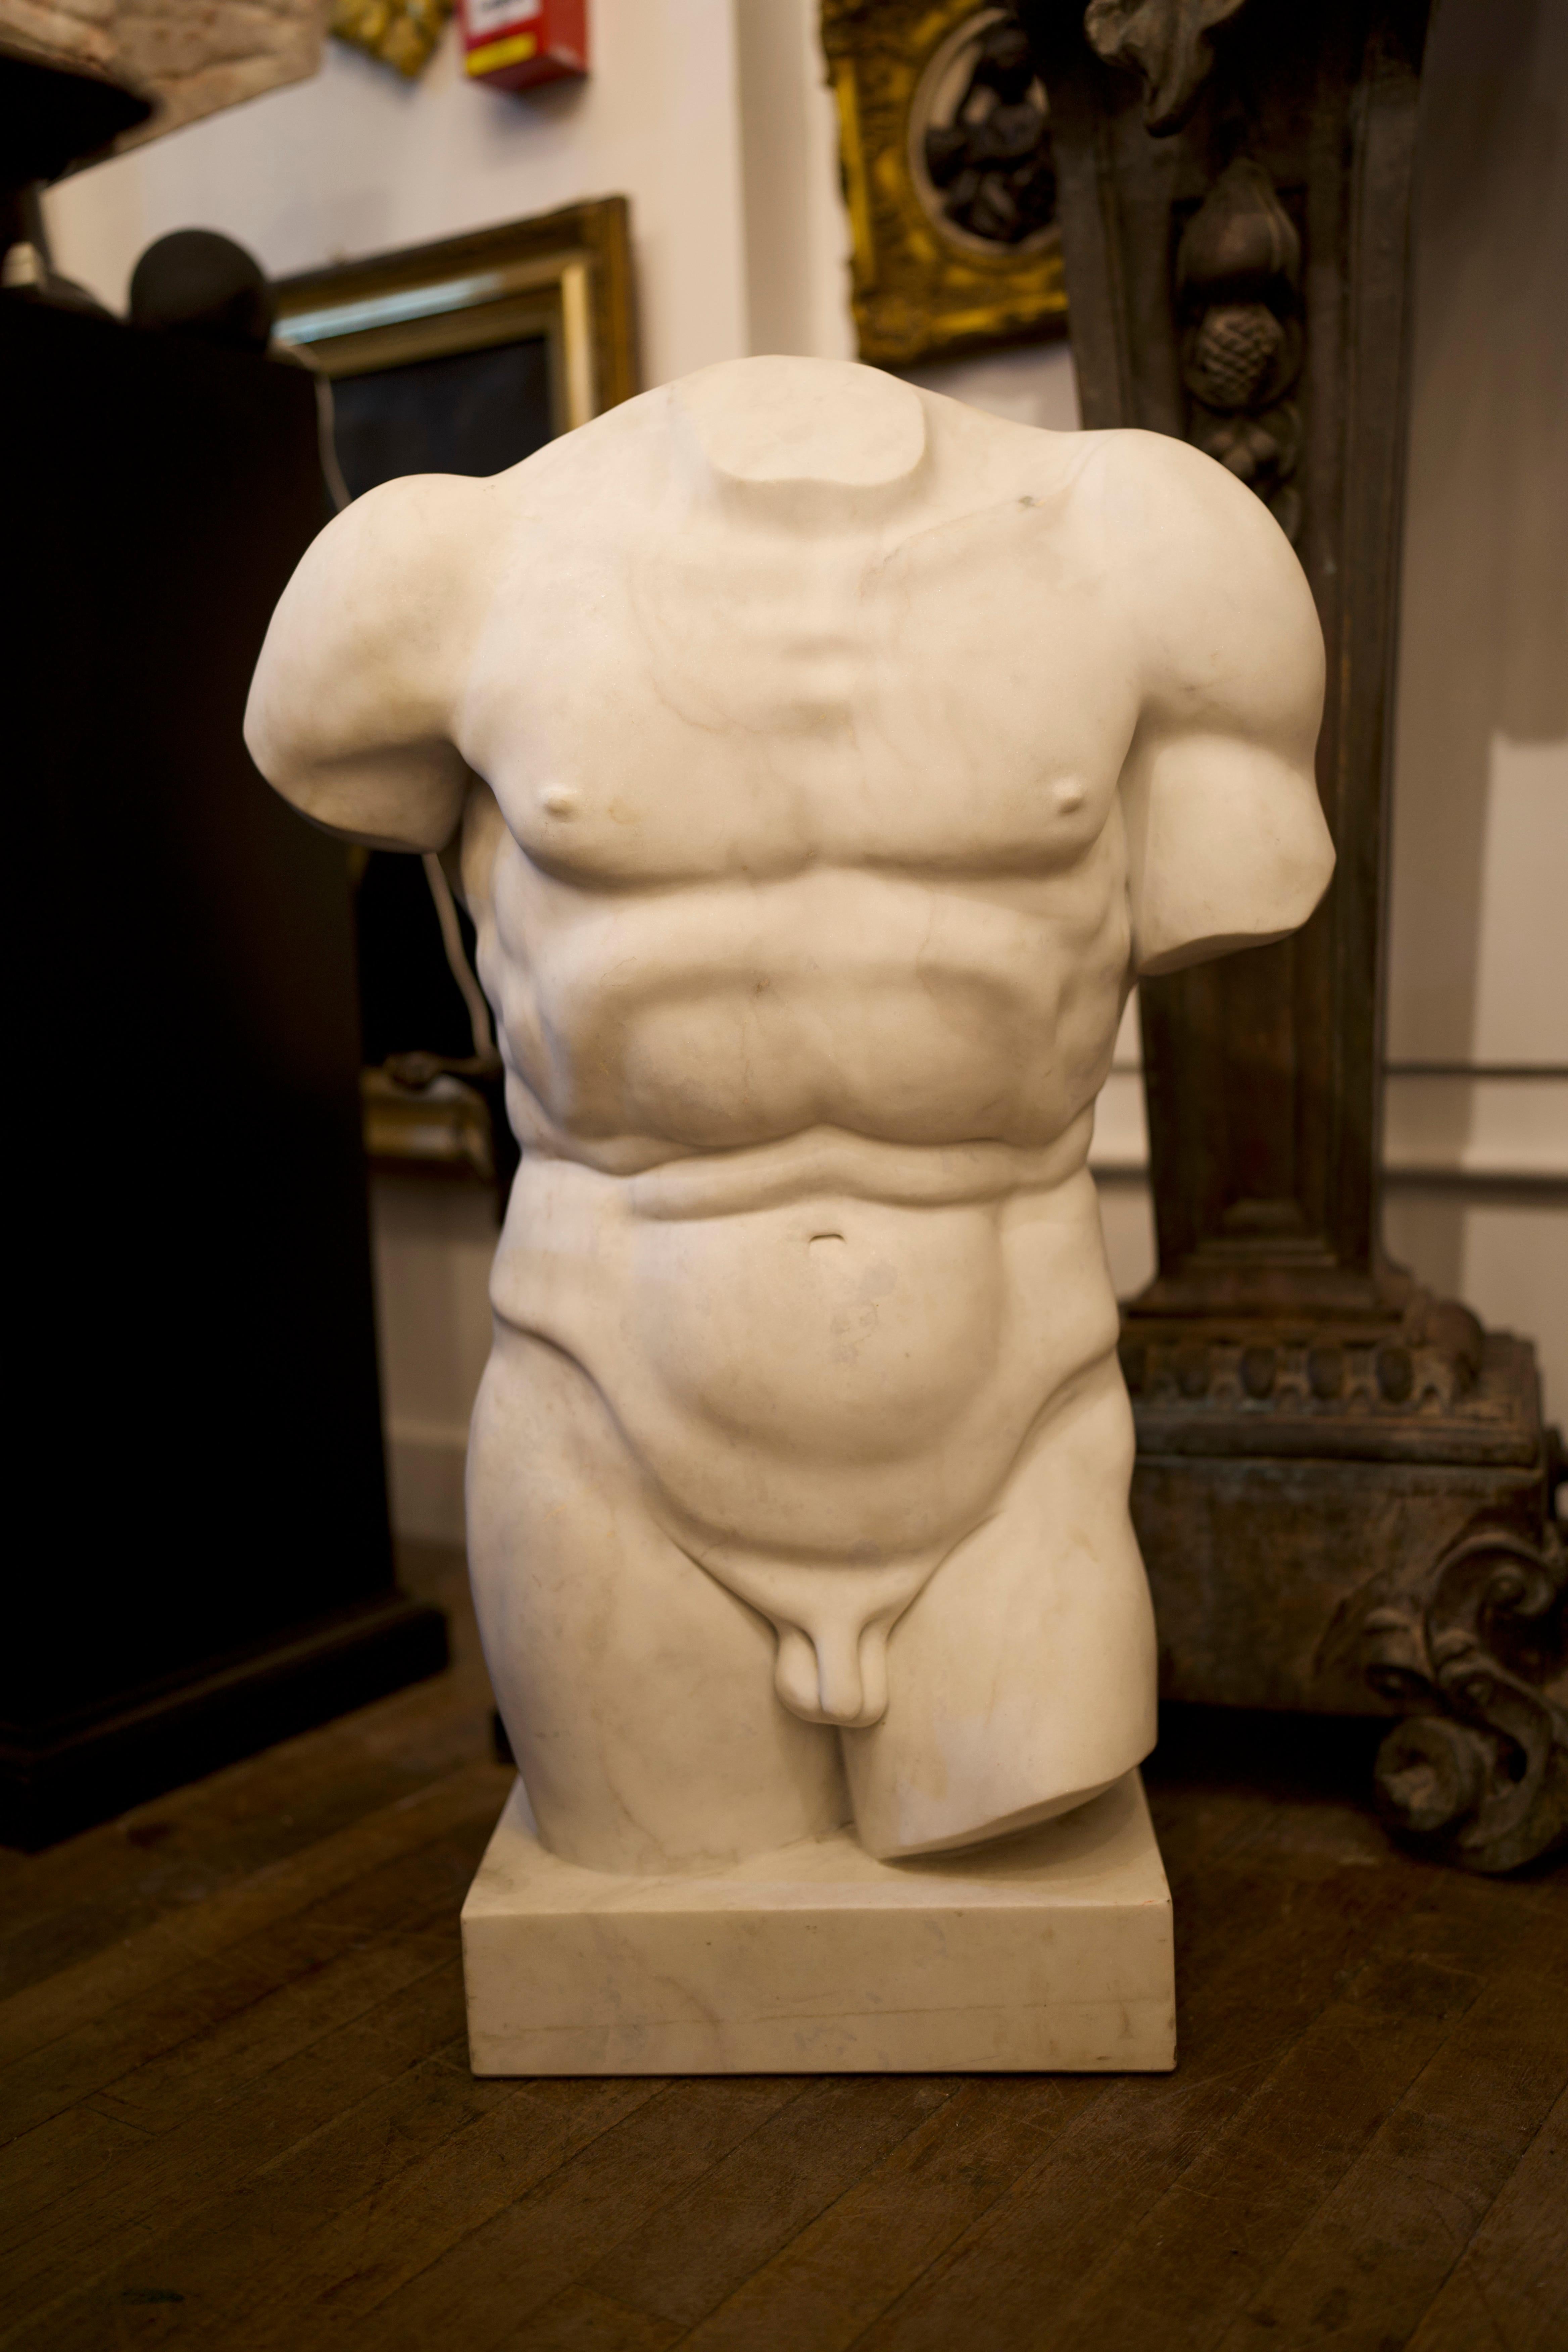 20th Century Monumental Grand Tour Marble Torso Statue nude carving.
Amazing Italian solid marble life-size torso standing with Classic Grand Tour look and design. The torso itself is a lesson in classical carving, look at how the musceltone has